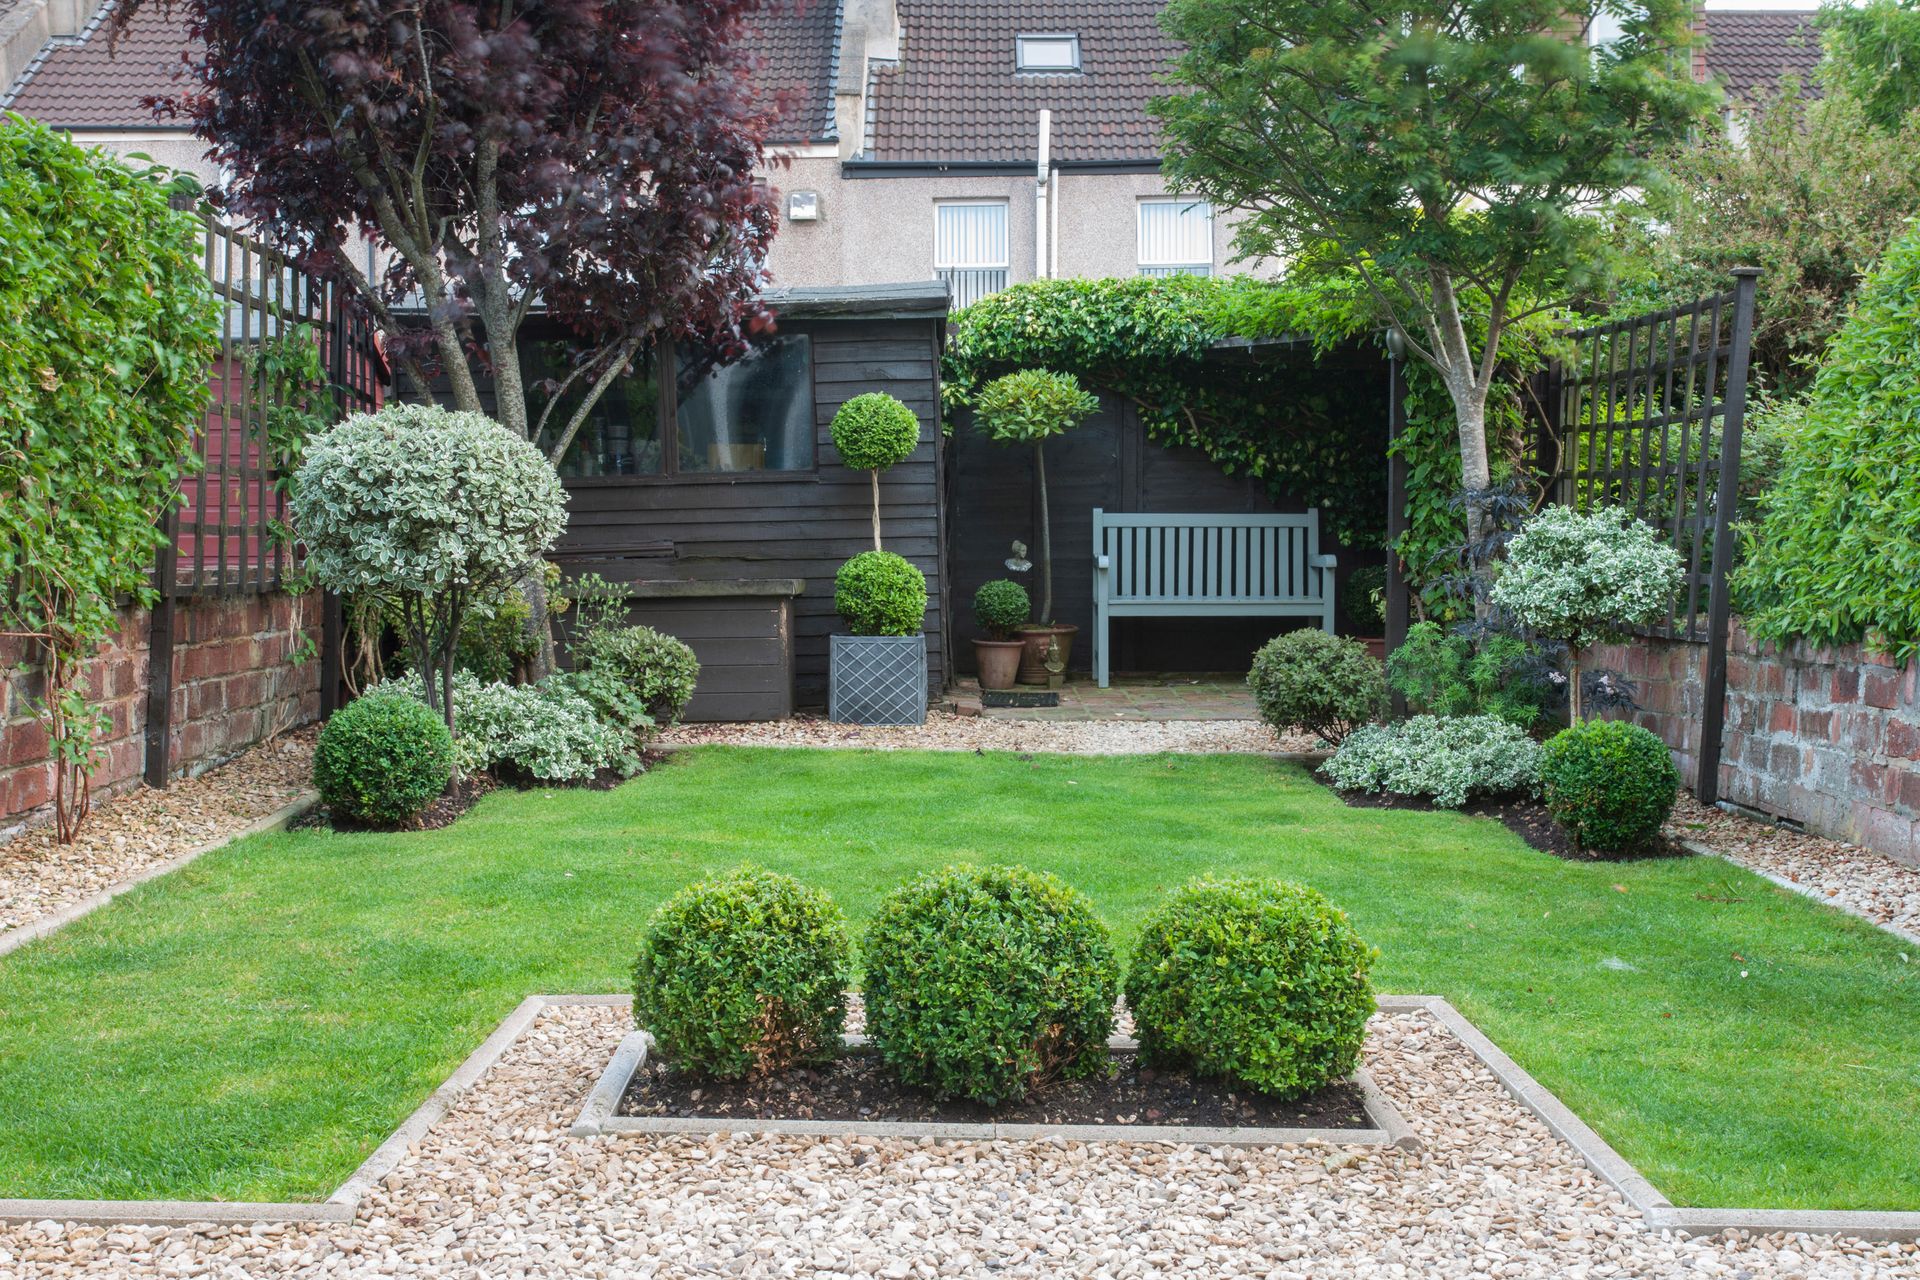 How much does landscaping cost? The price of redesigning a front or ...